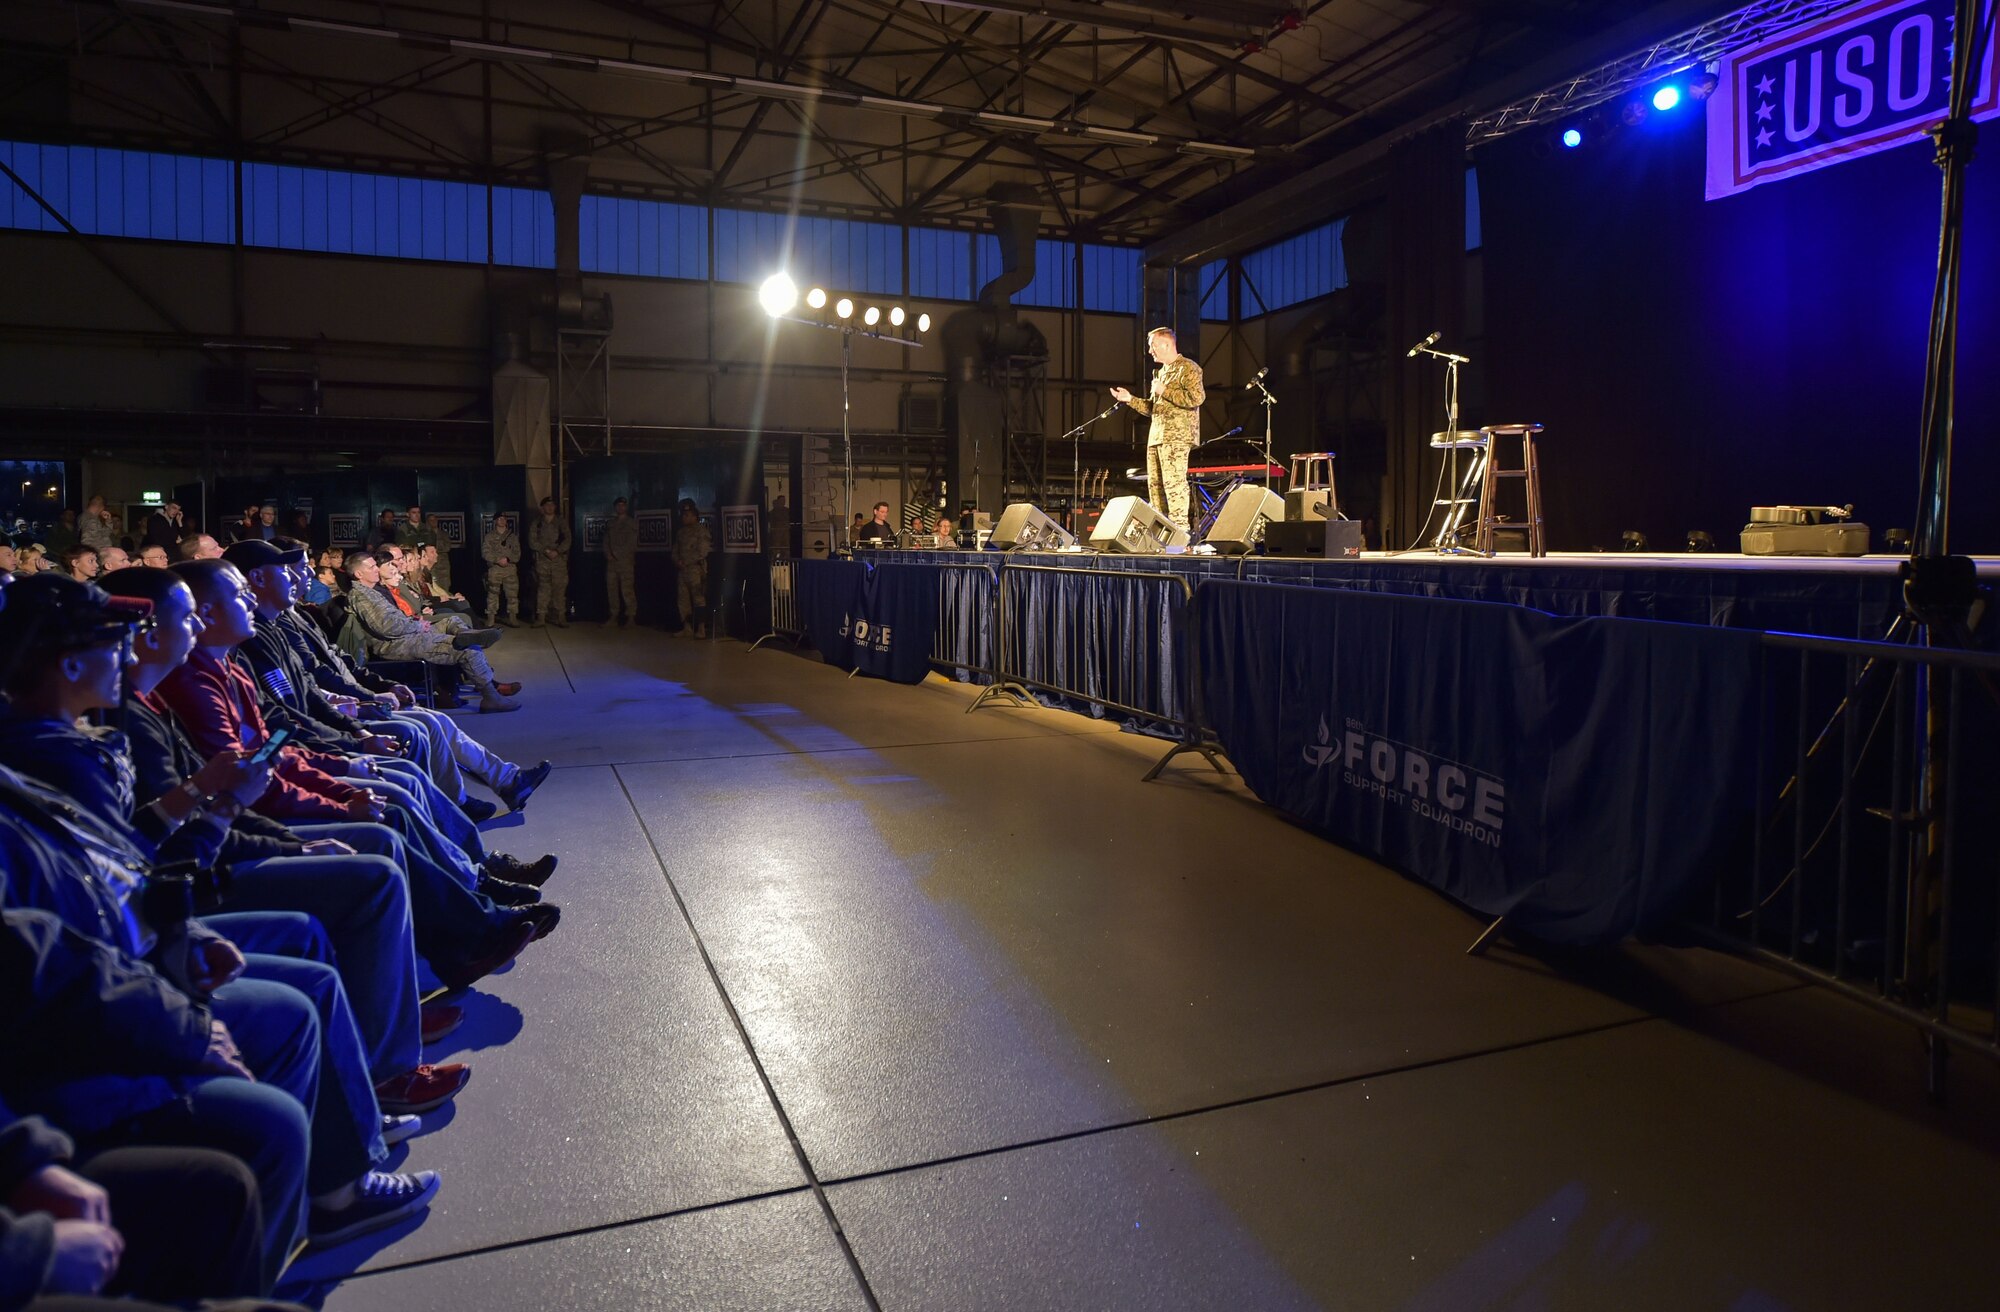 U.S. Marine Corps Gen. Joseph F. Dunford Jr., chairman of the Joint Chiefs of Staff, introduces the celebrities from the 2015 USO Holiday Troop Tour, Dec. 9, 2015, at Ramstein Air Base, Germany. Dunford accompanied the special guest during the USO’s annual troop tour that includes several stops to visit service members overseas. (U.S. Air Force photo/Staff Sgt. Leslie Keopka)